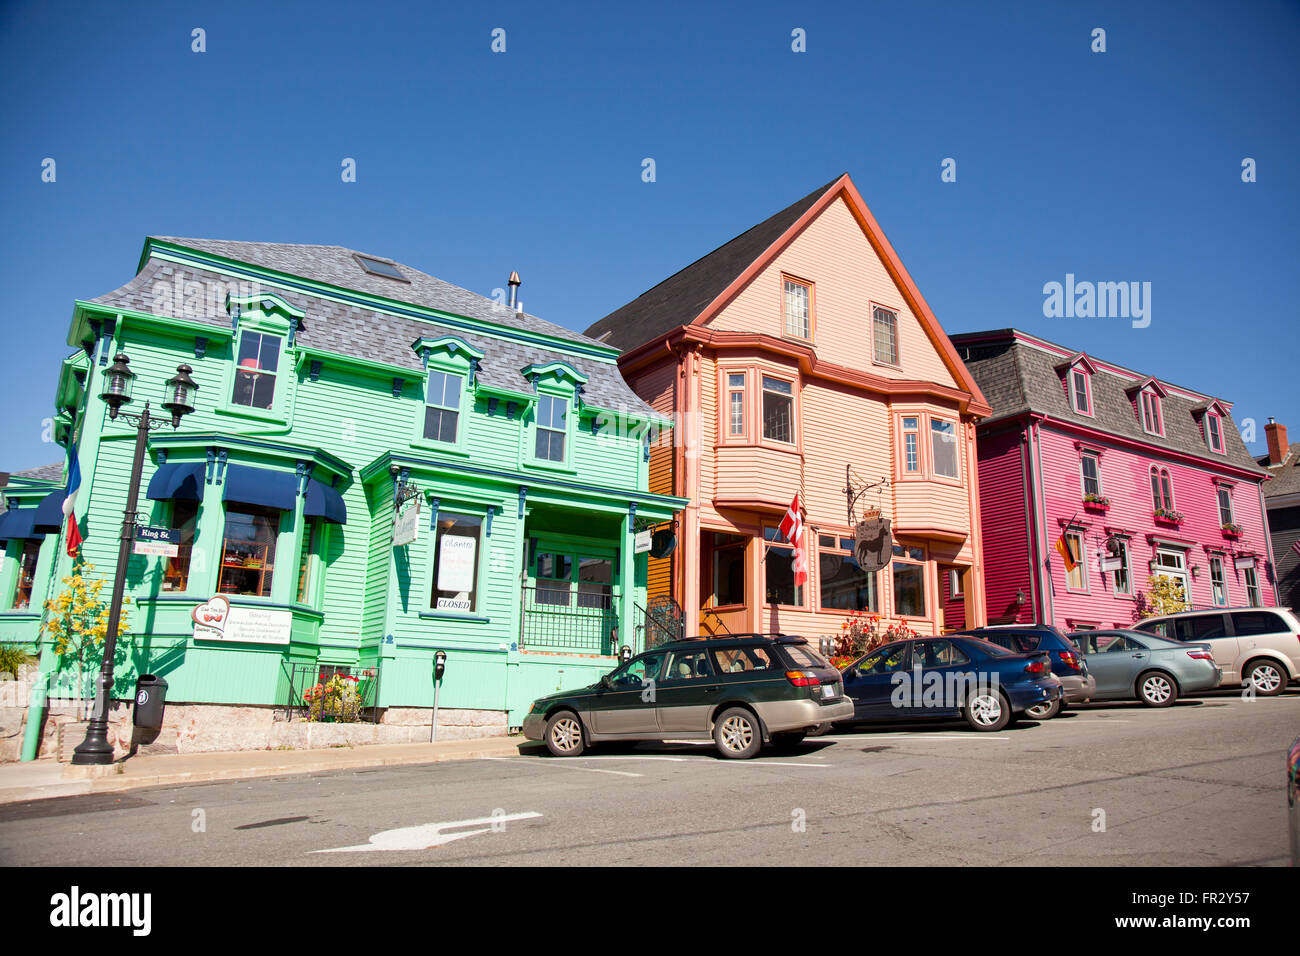 Downtown Lunenburg in Nova Scotia, canada with colorful old buildings Stock Photo